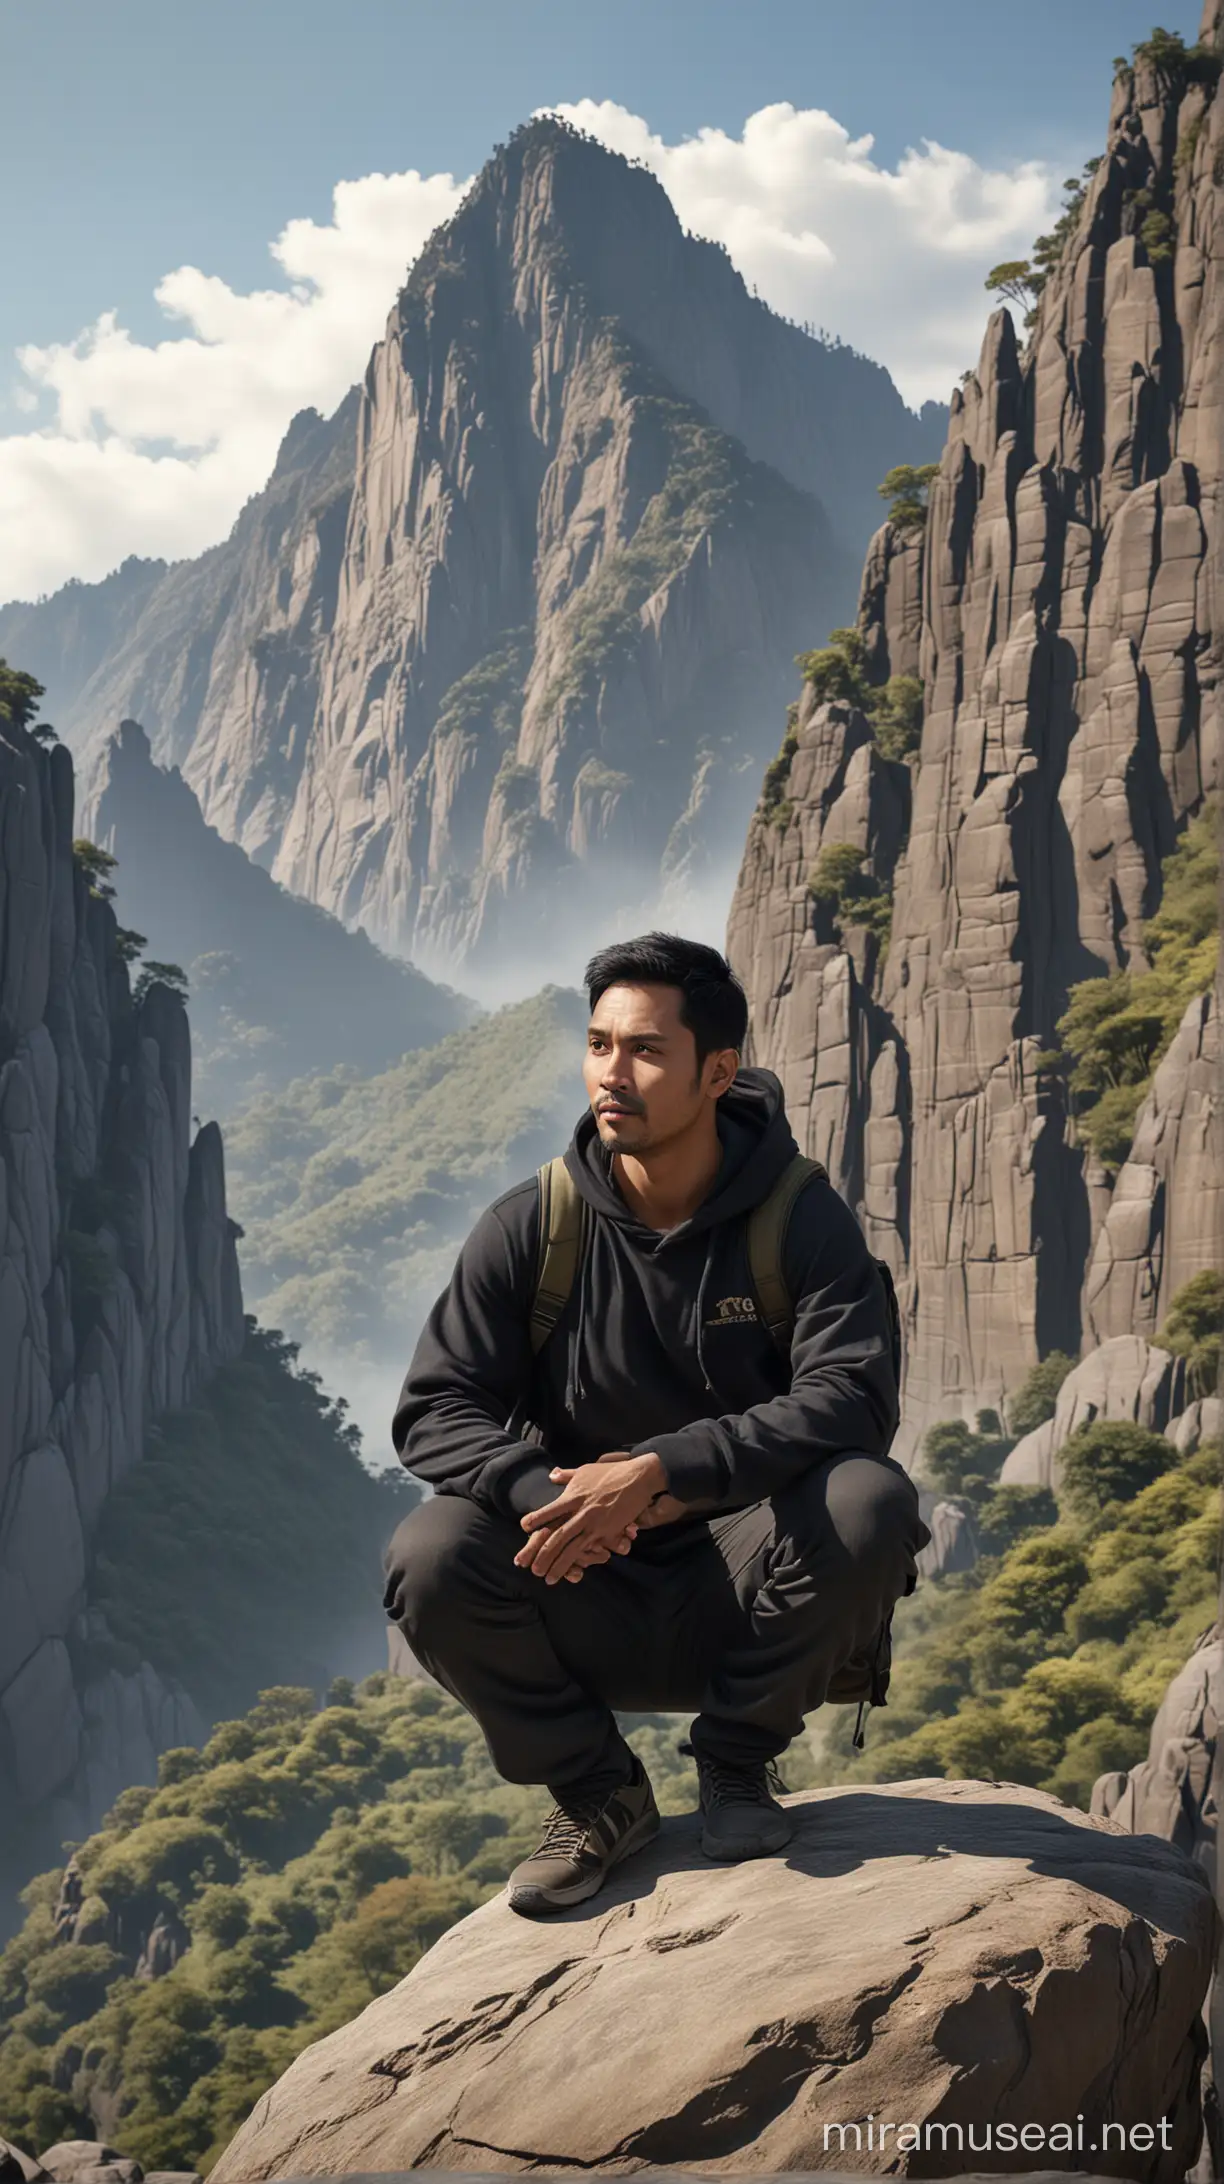 Indonesian Man Relaxing on Rock with Kong in Mountain Landscape